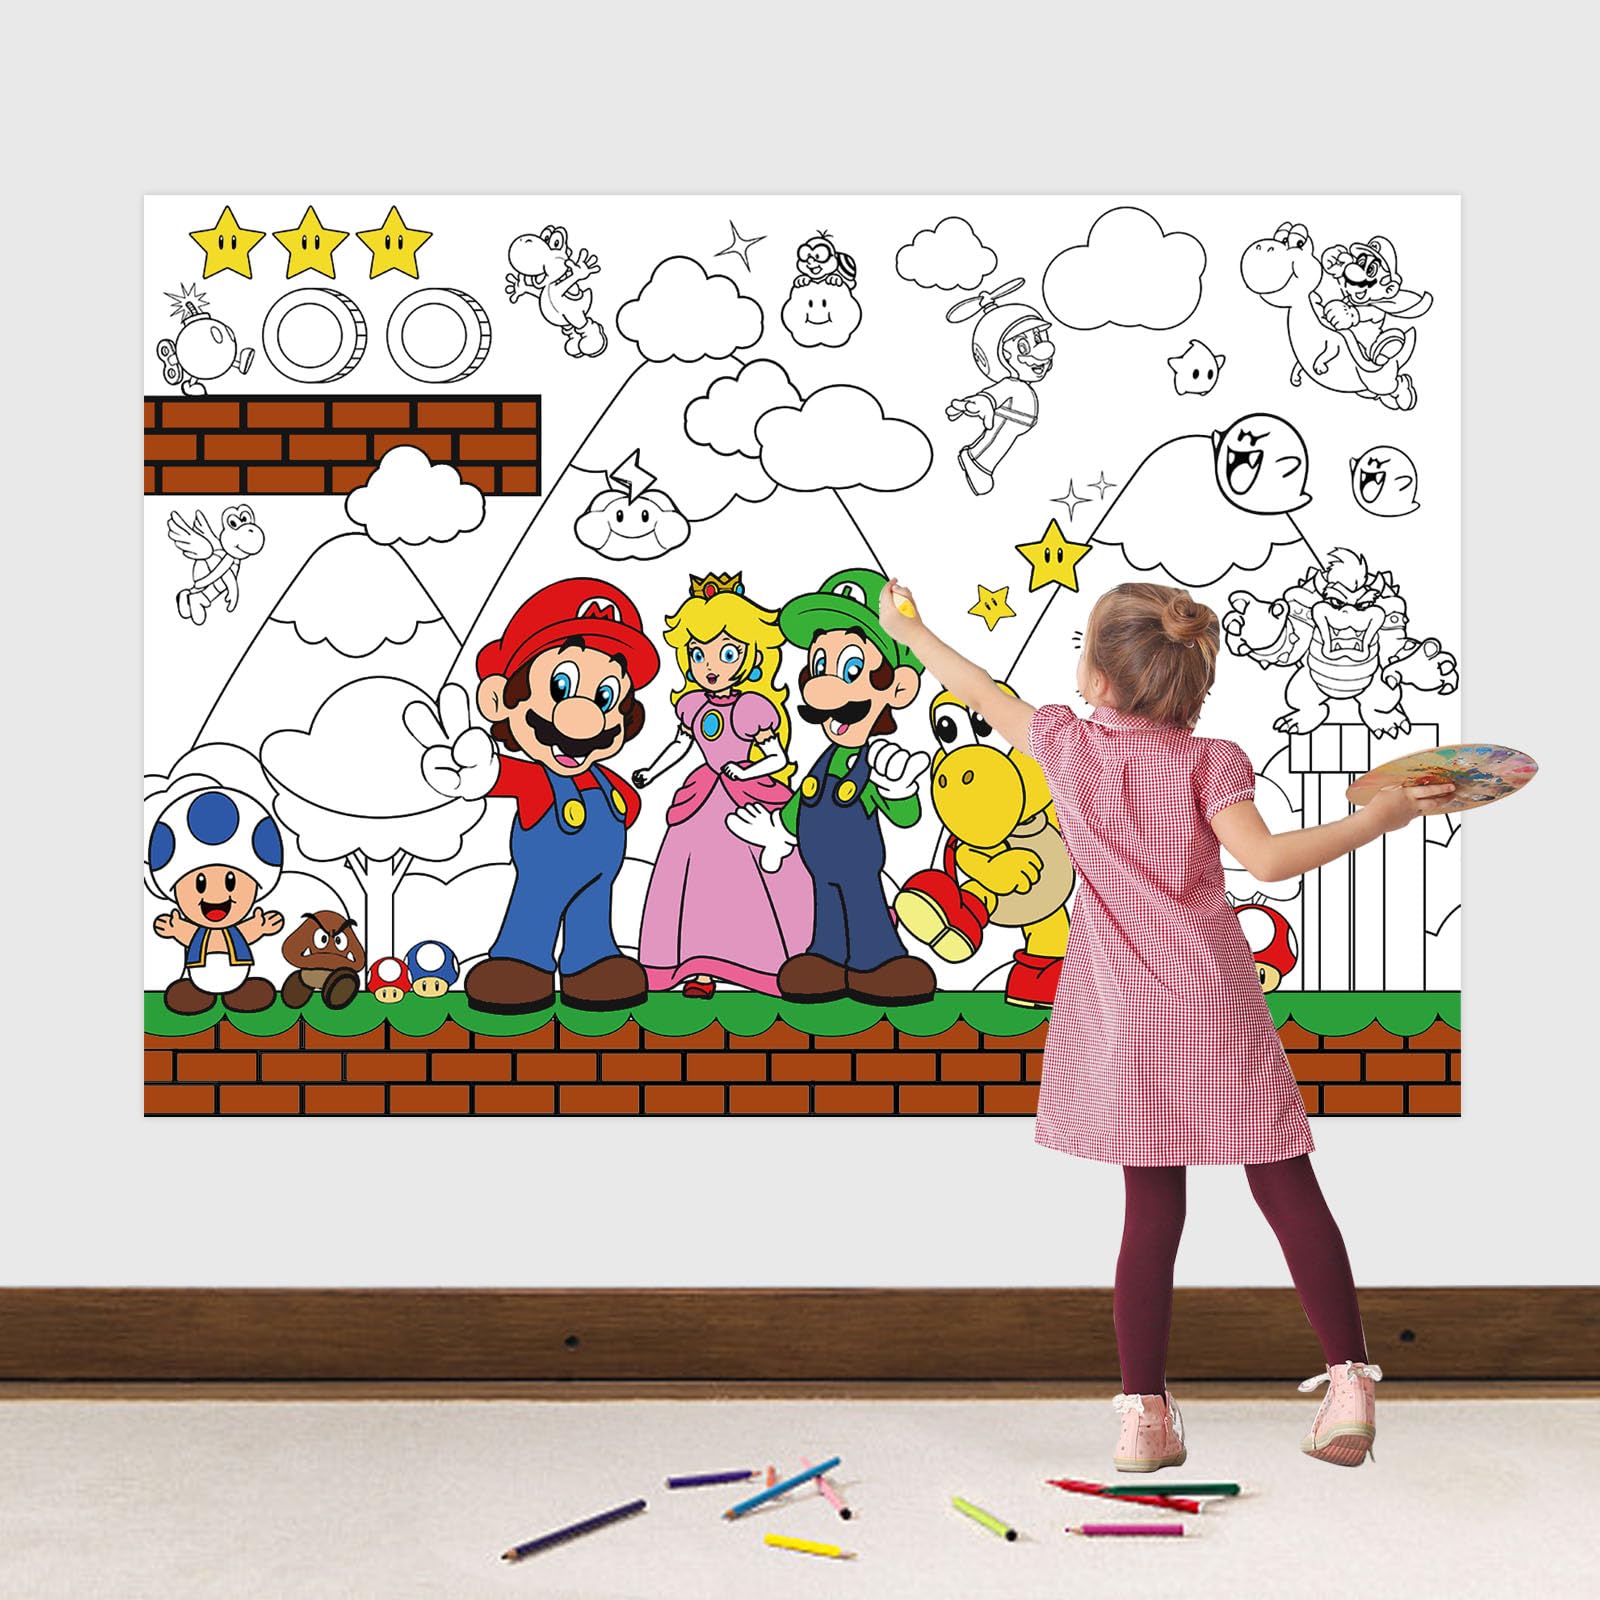 Yopenmoune mario party favors super bros coloring book giant coloring poster large coloring tablecloth huge table cover for mario party favors x inch toys games